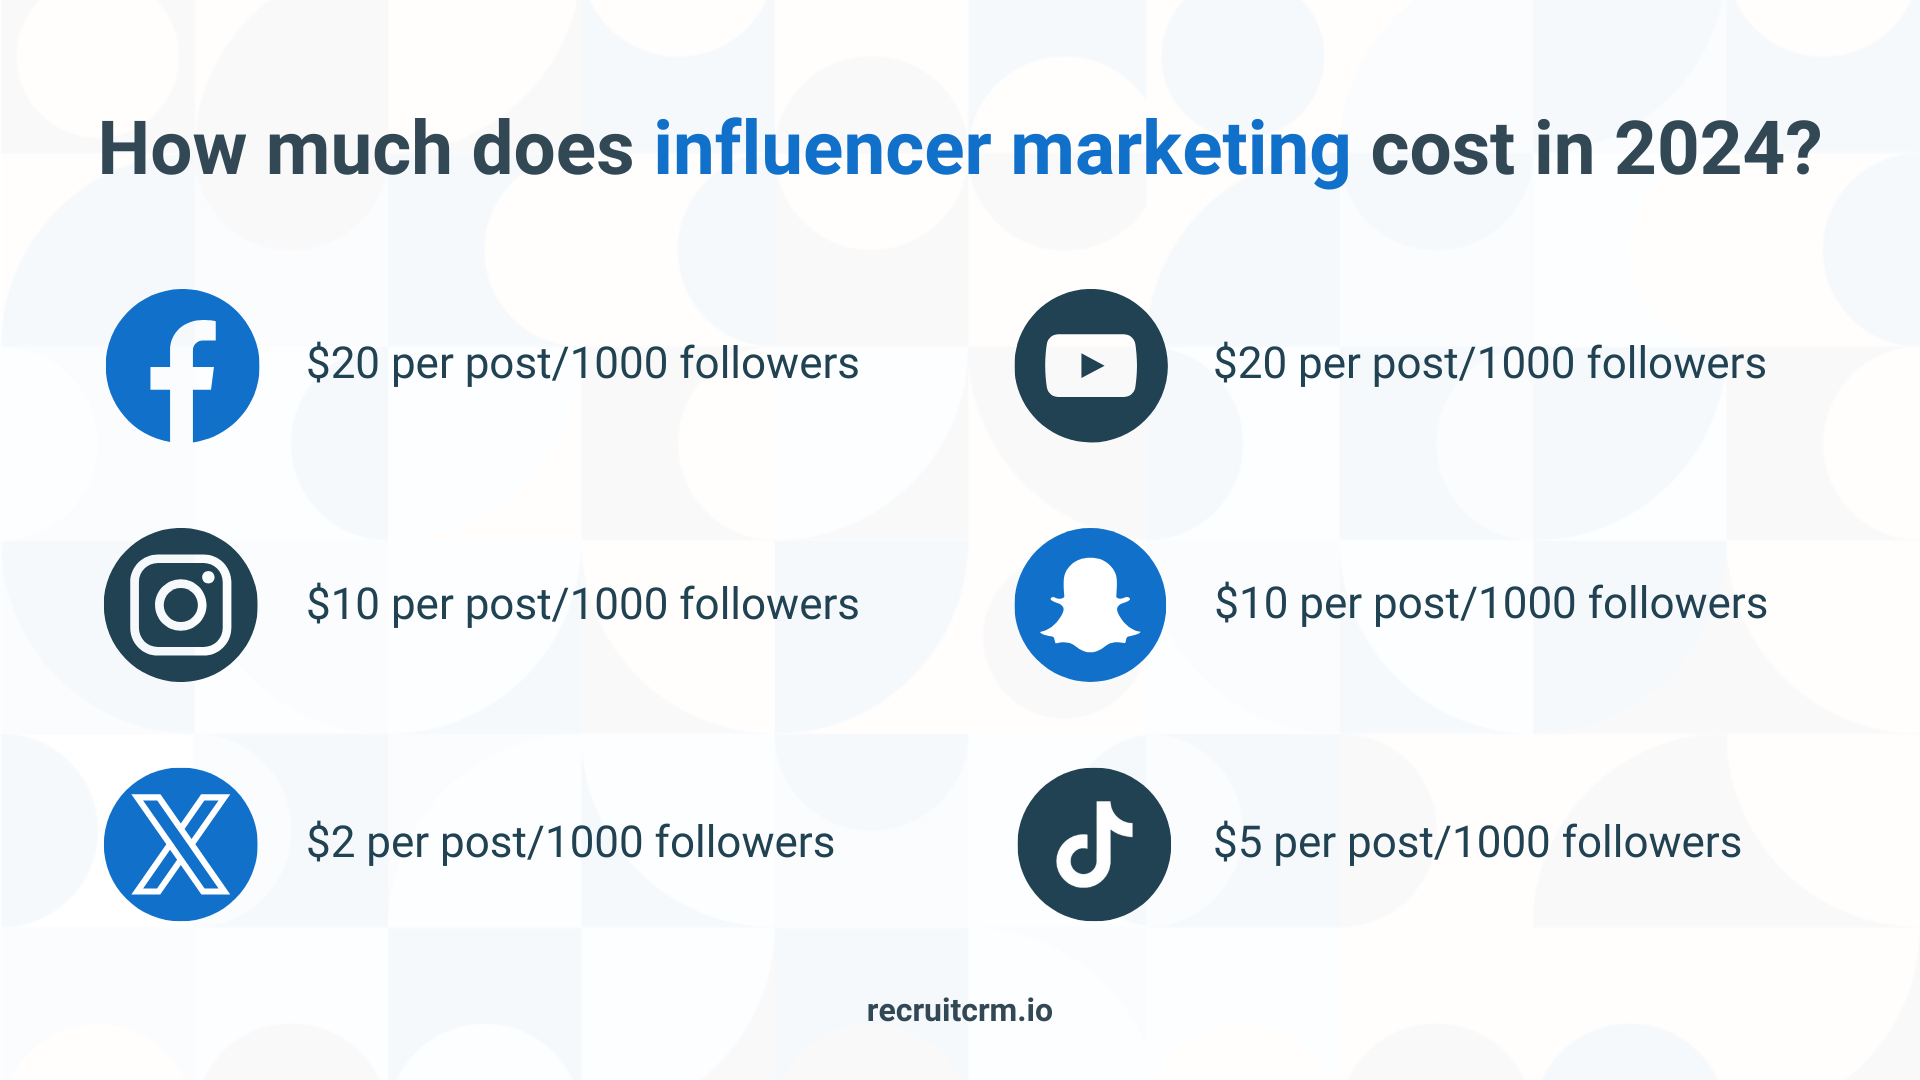 How much does influencer marketing cost in 2024?